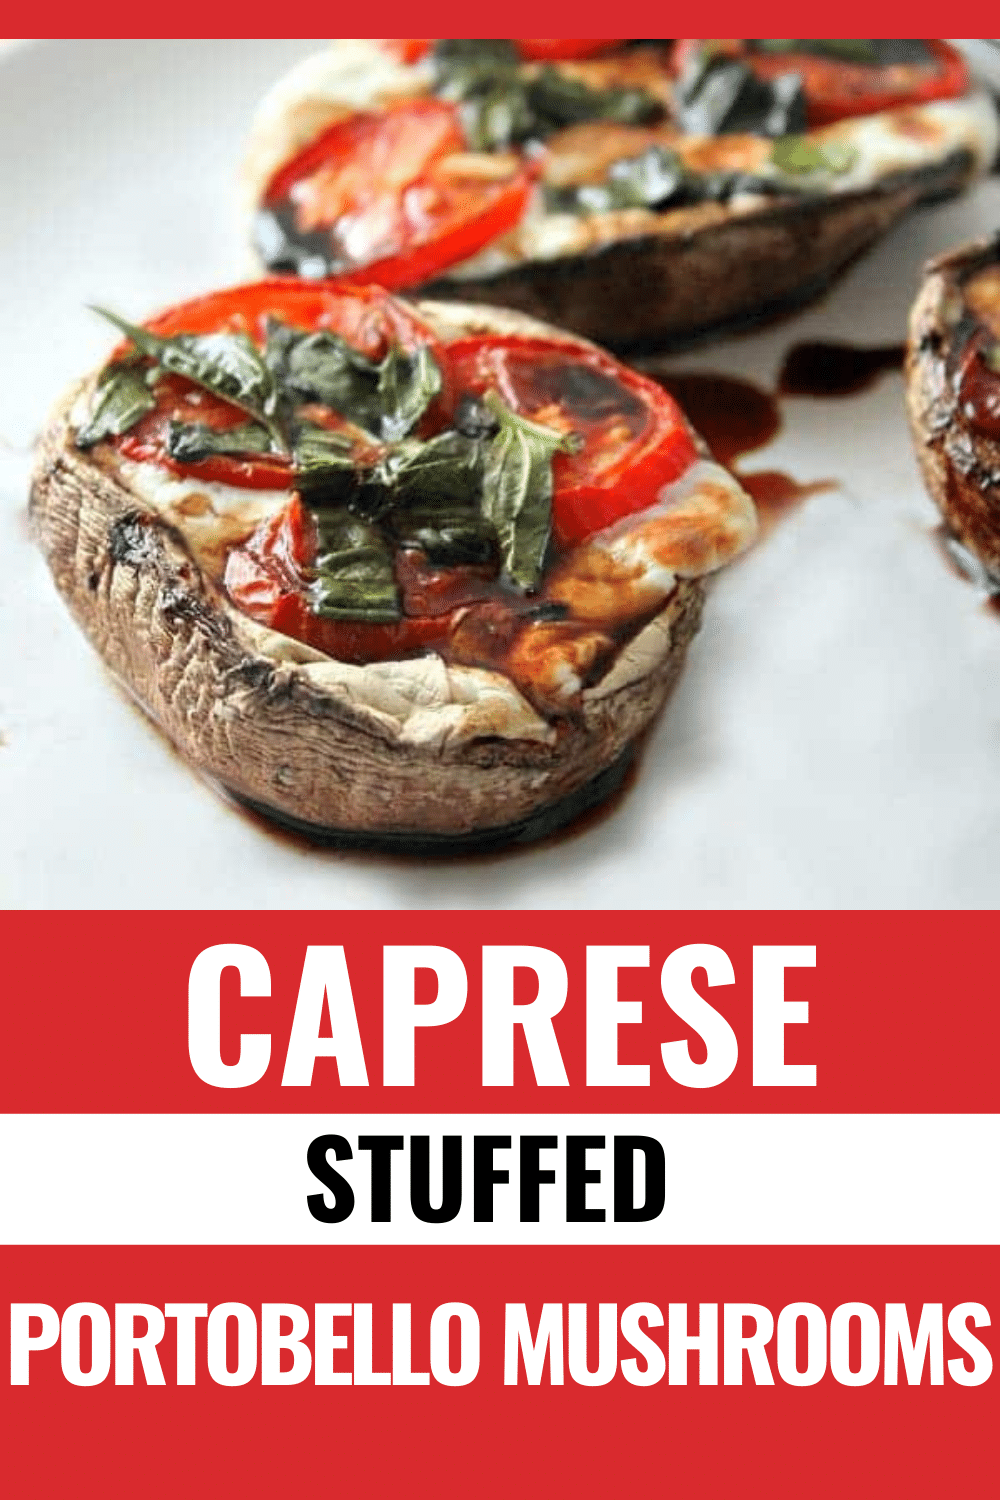 These caprese stuffed portobello mushrooms are a delicious and hearty vegetarian option for lunch or dinner that are fast and easy to make. #vegetarian #caprese#stuffedmushrooms #portobellomushrooms via @wondermomwannab